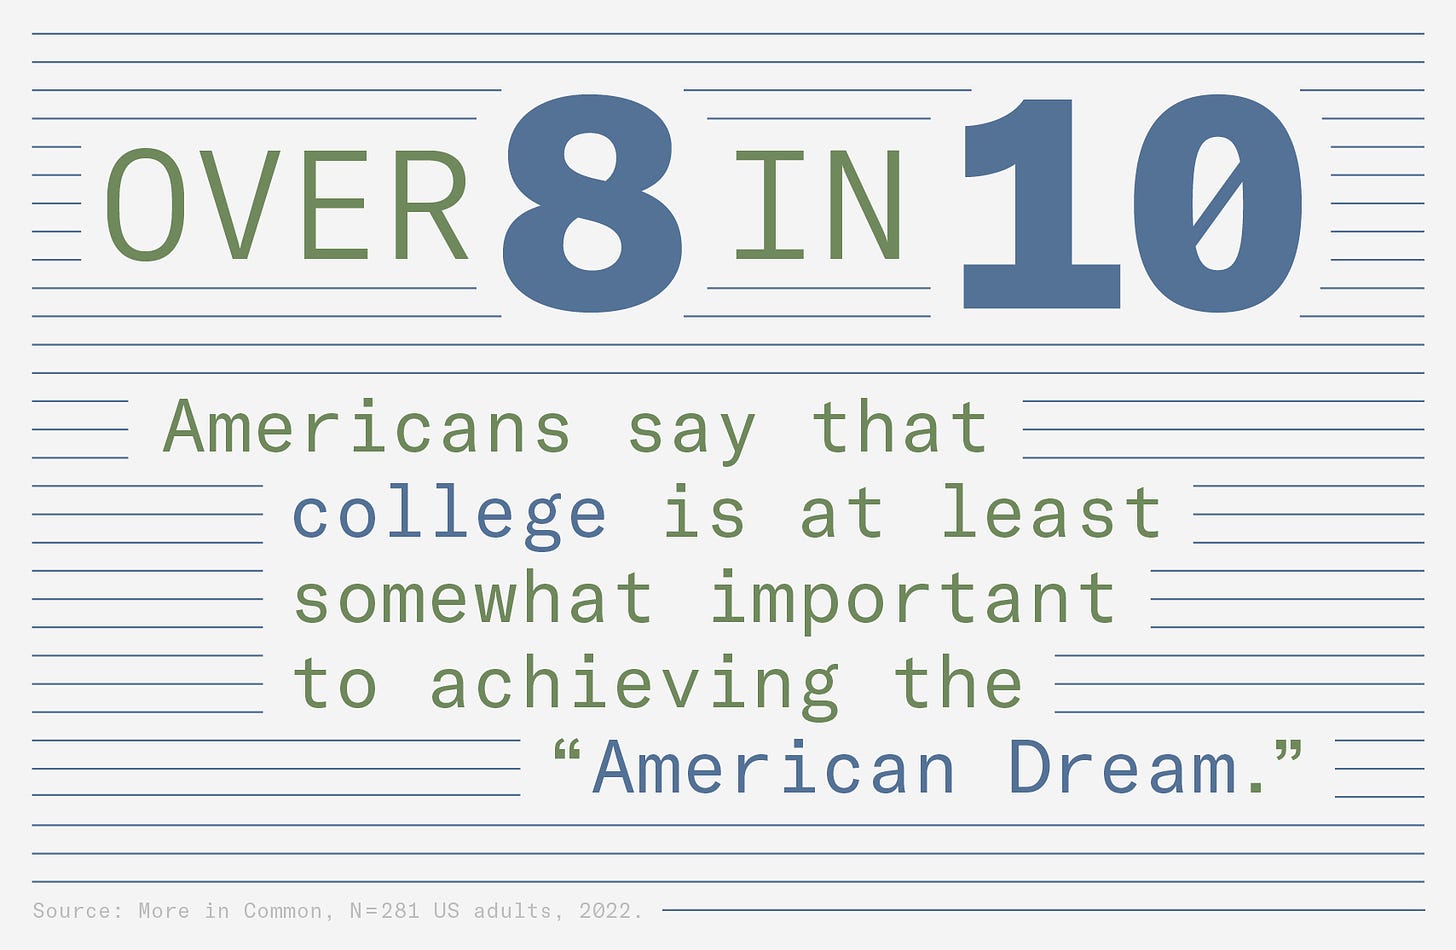 Over 8 in 10 American respondents say that college is at least somewhat important to achieving the “American Dream.”